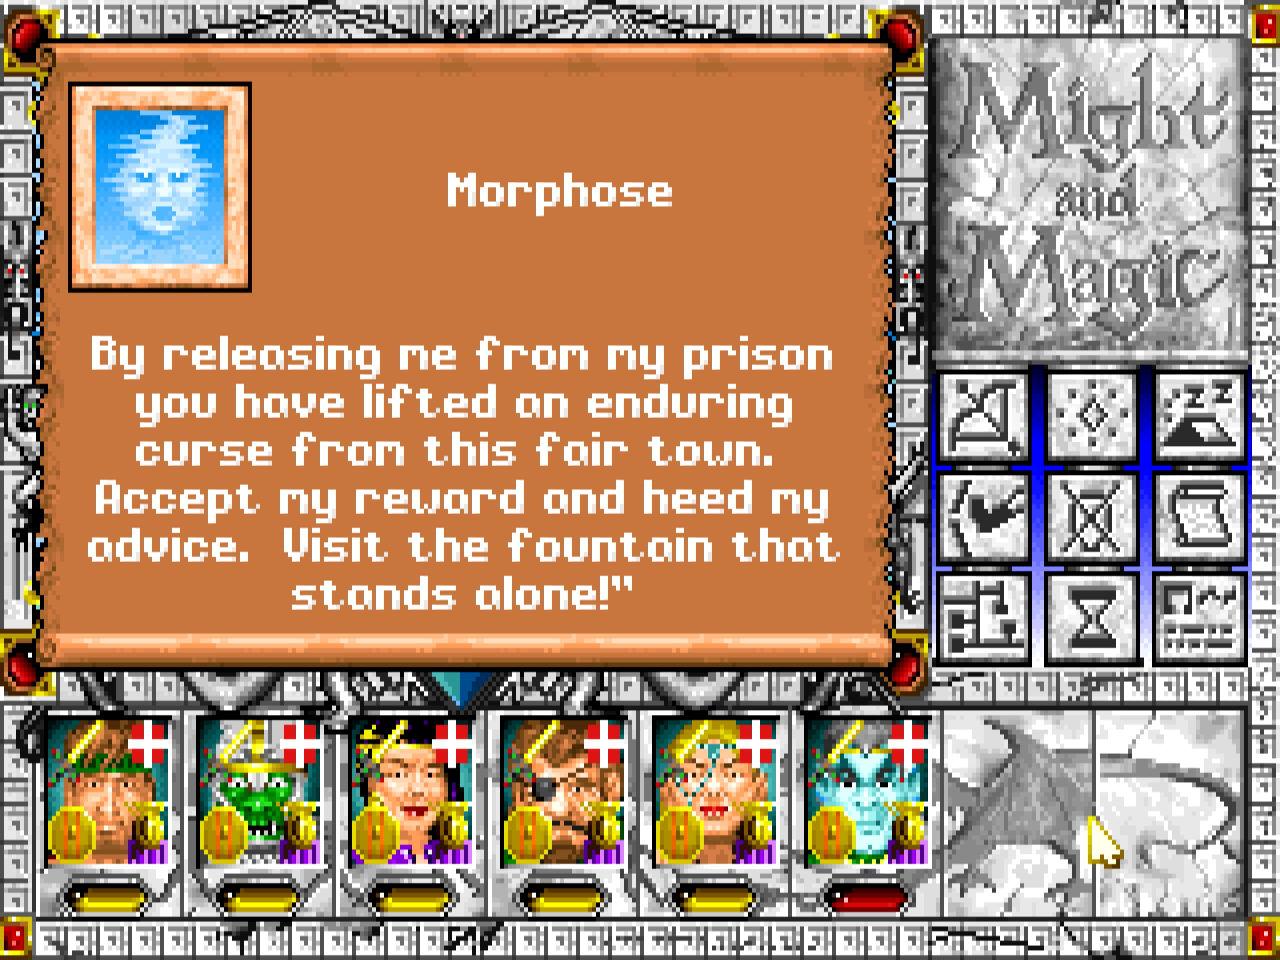 Speaking with someone named Morphose